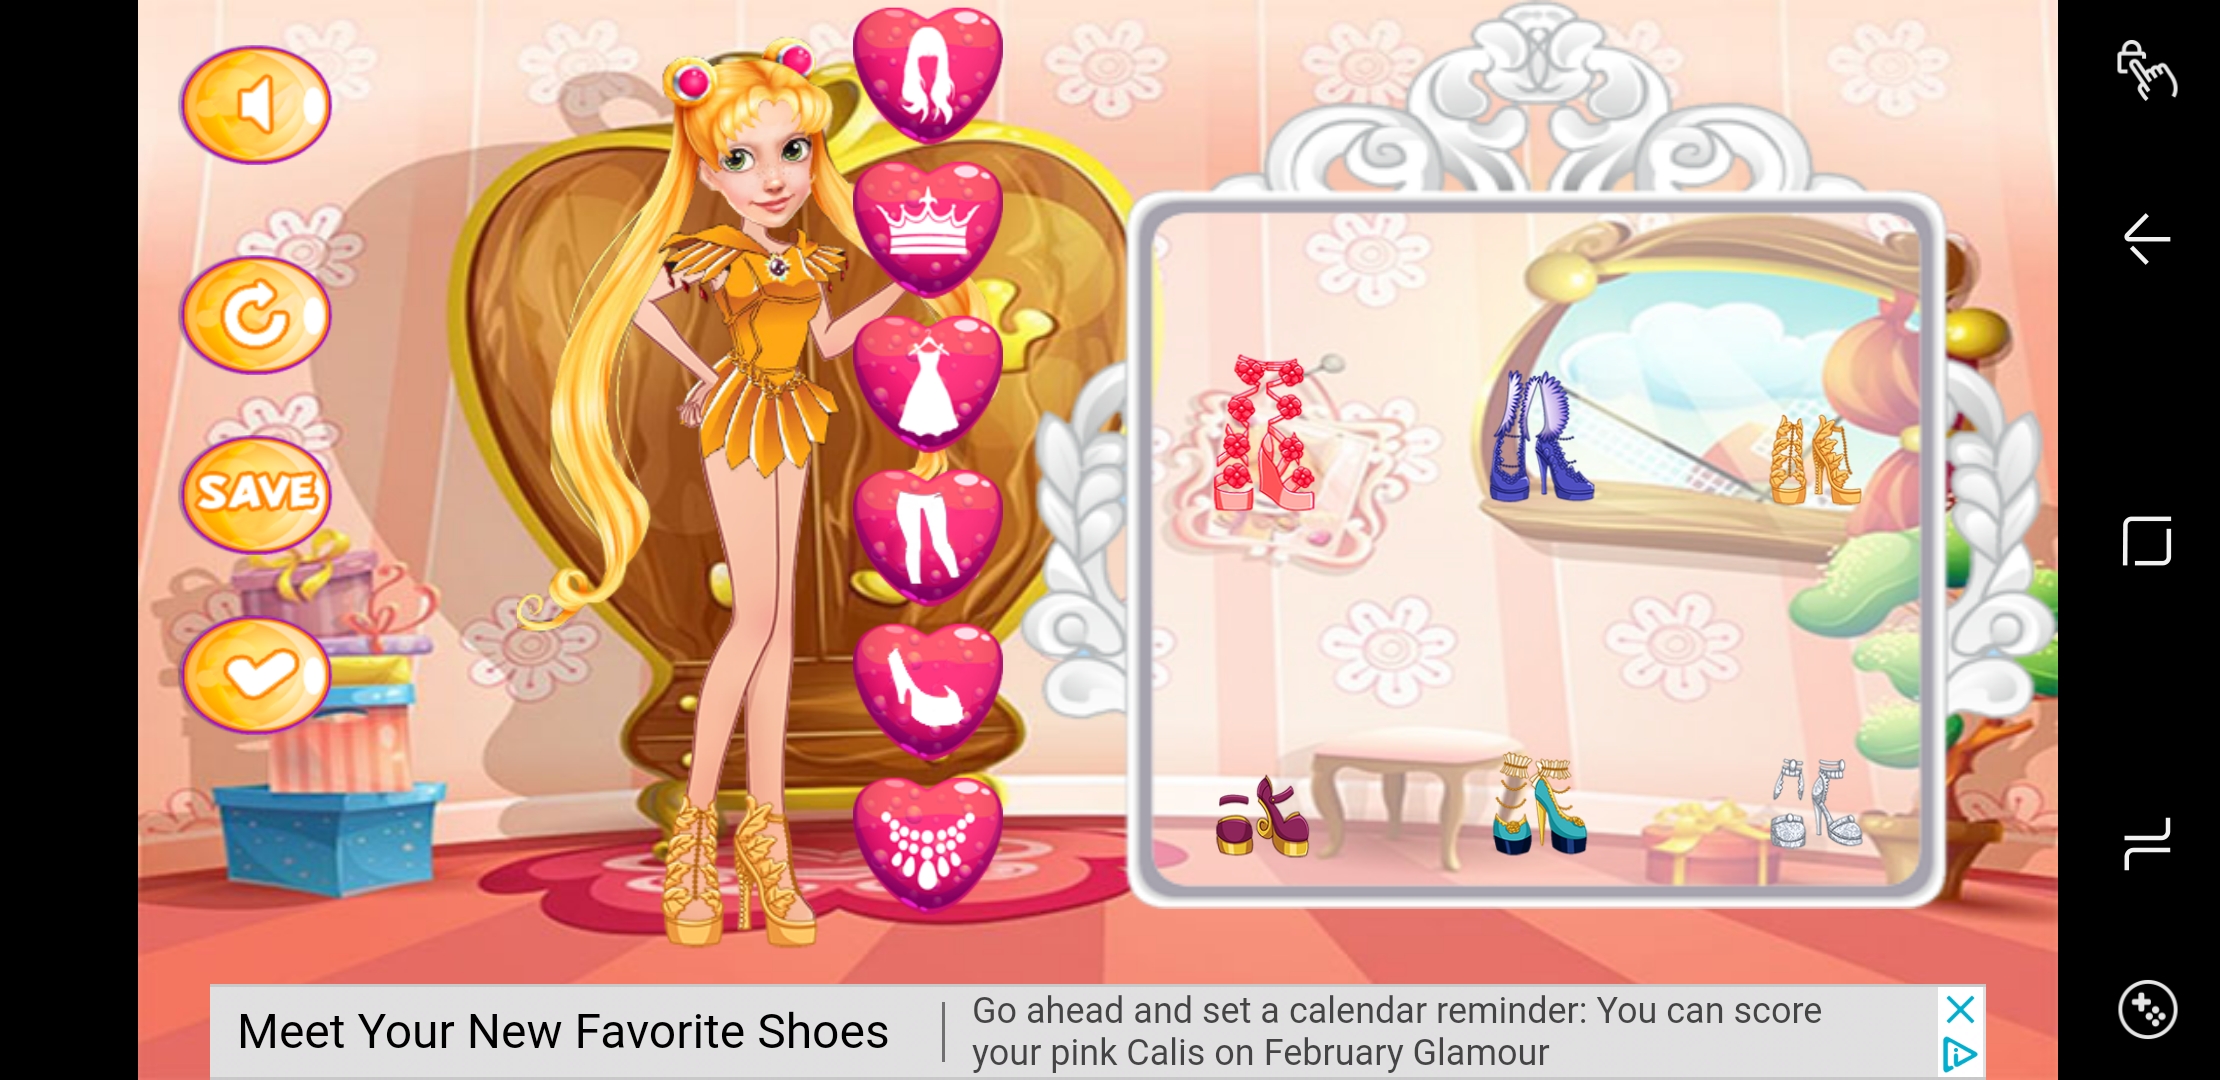 Dress Up Games (Pantyhose, Socks, Skirts, Dresses, Pigtails, Ponytails ...and much much more) @iMGSRC.RU